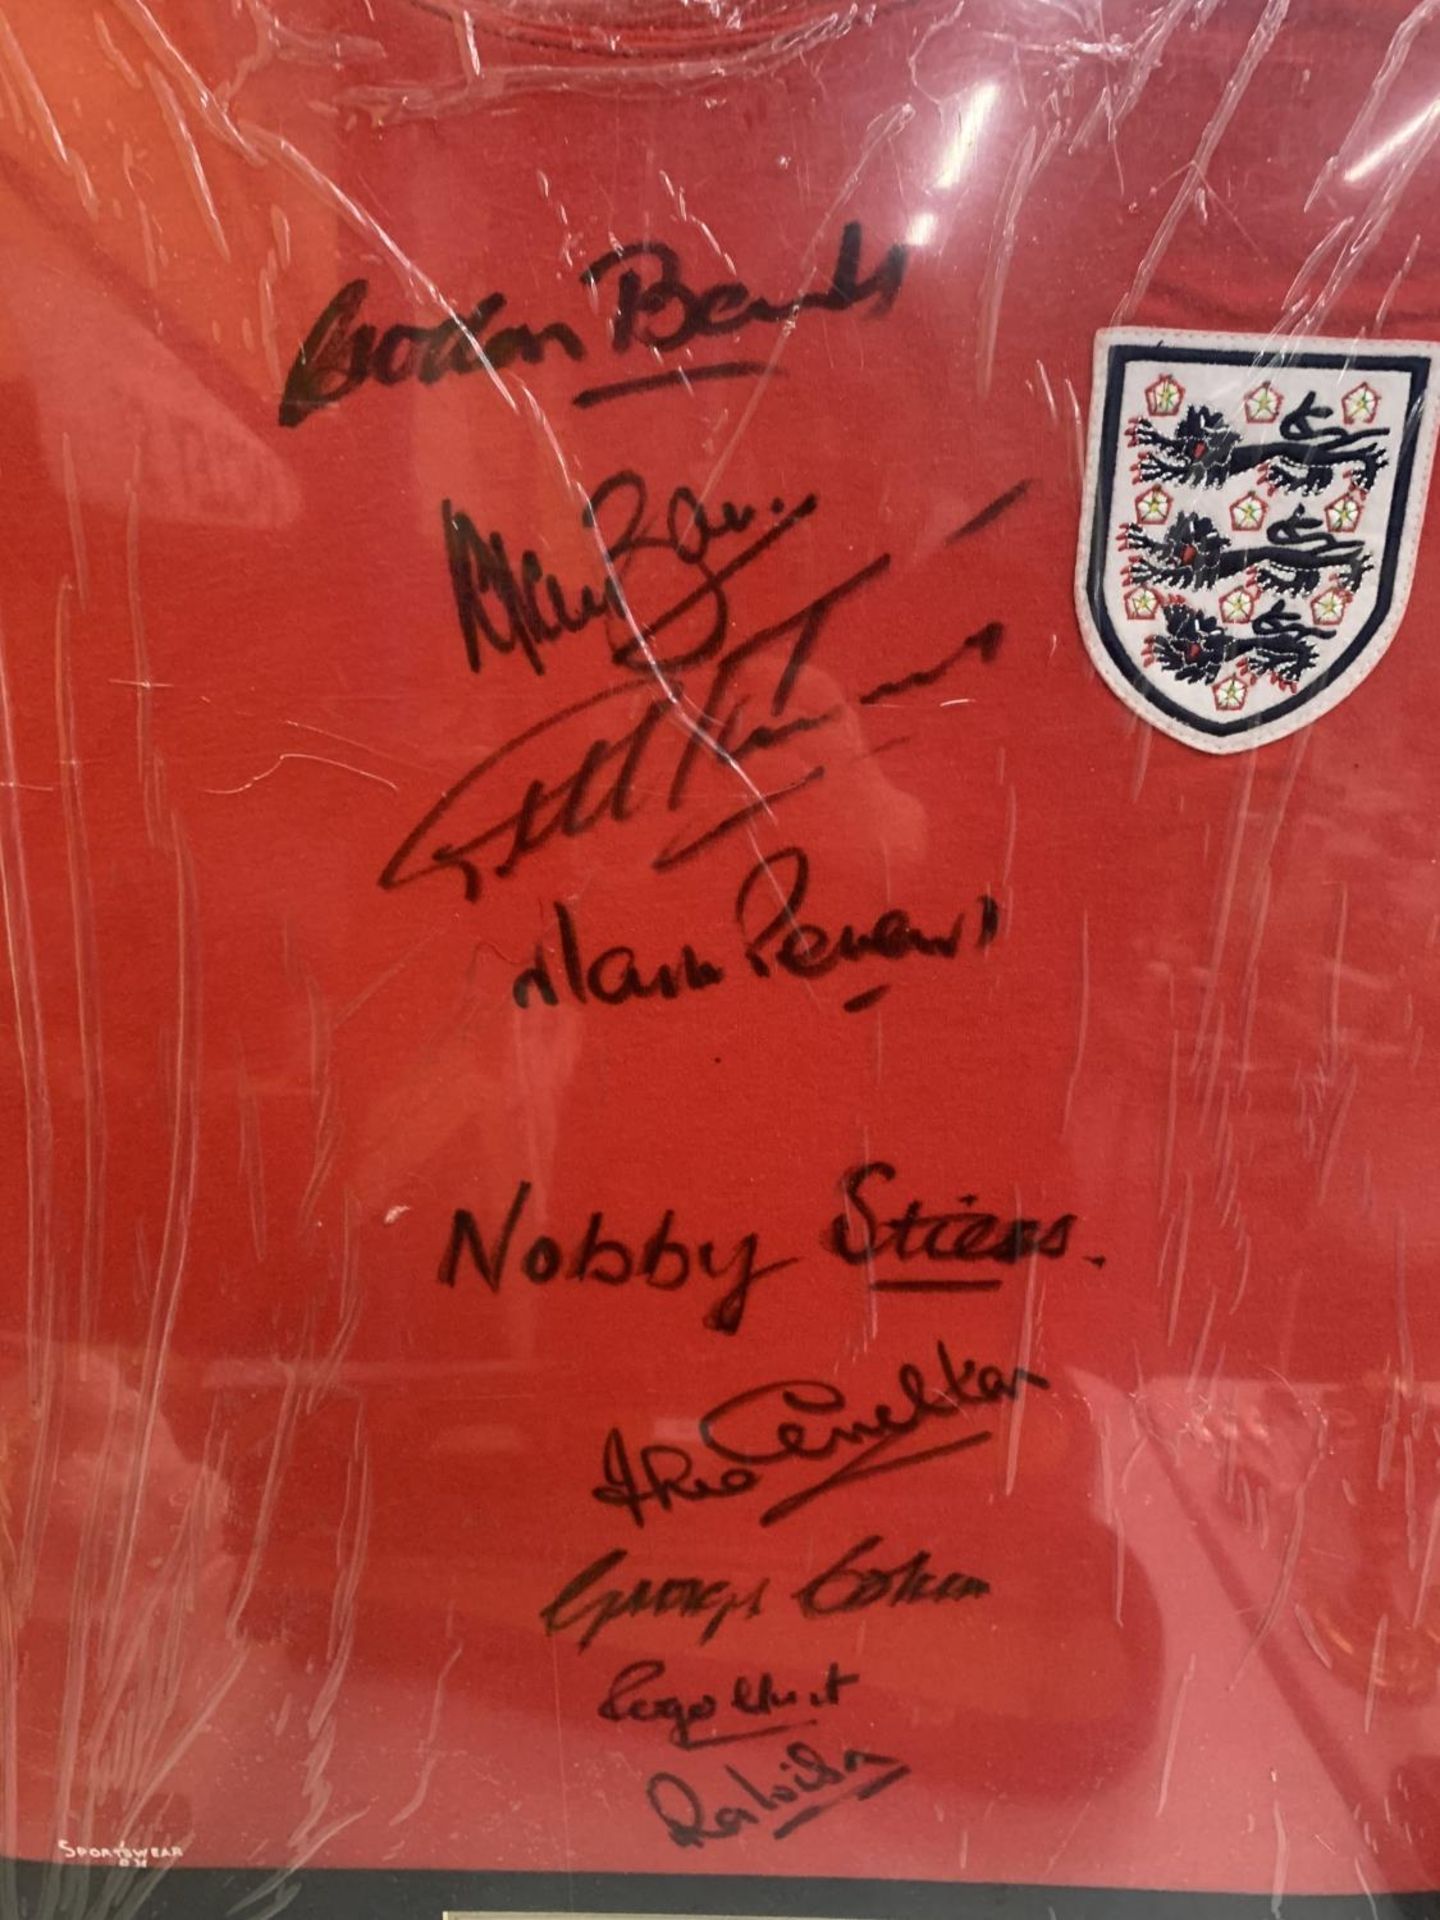 A FRAMED AUTHENTIC 1966 ENGLAND WORLD CUP FOOTBALL SHIRT SIGNED BY GORDON BANKS, GEOFF HURST, JACK - Image 4 of 9